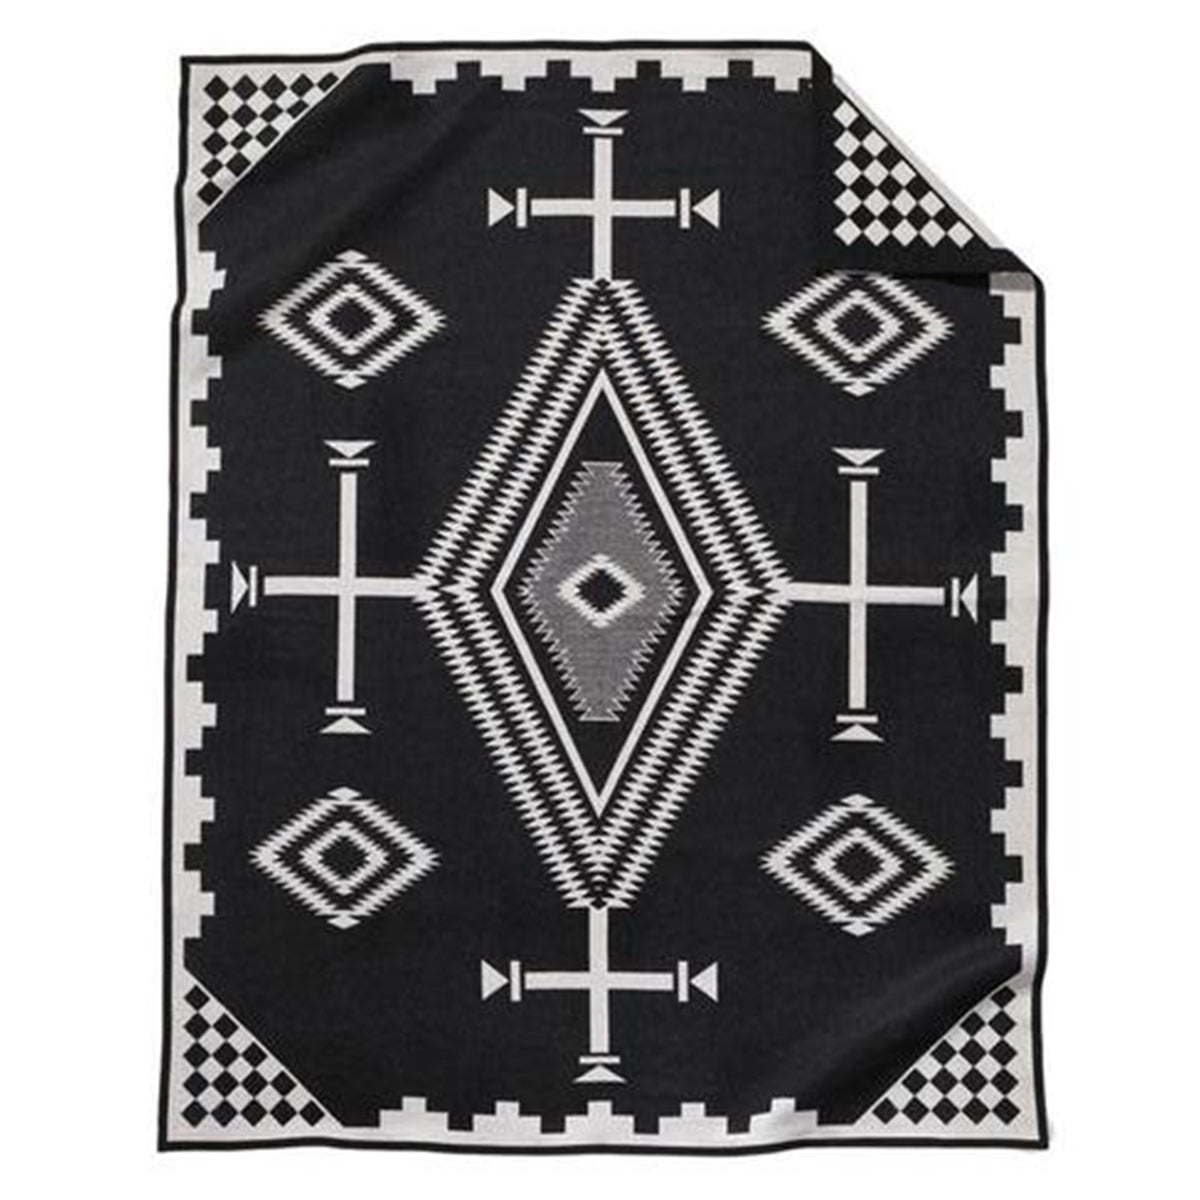 Pendleton blankets are heirloom-quality wool blankets made in the USA using wool that sourced from ranches around the country. This reversible black twin los ojos blanket is modern and historic as it features Spanish crosses, diamond-shaped “eyes” (ojos) and the symbols of the Navajo Four Mountains of Creation.